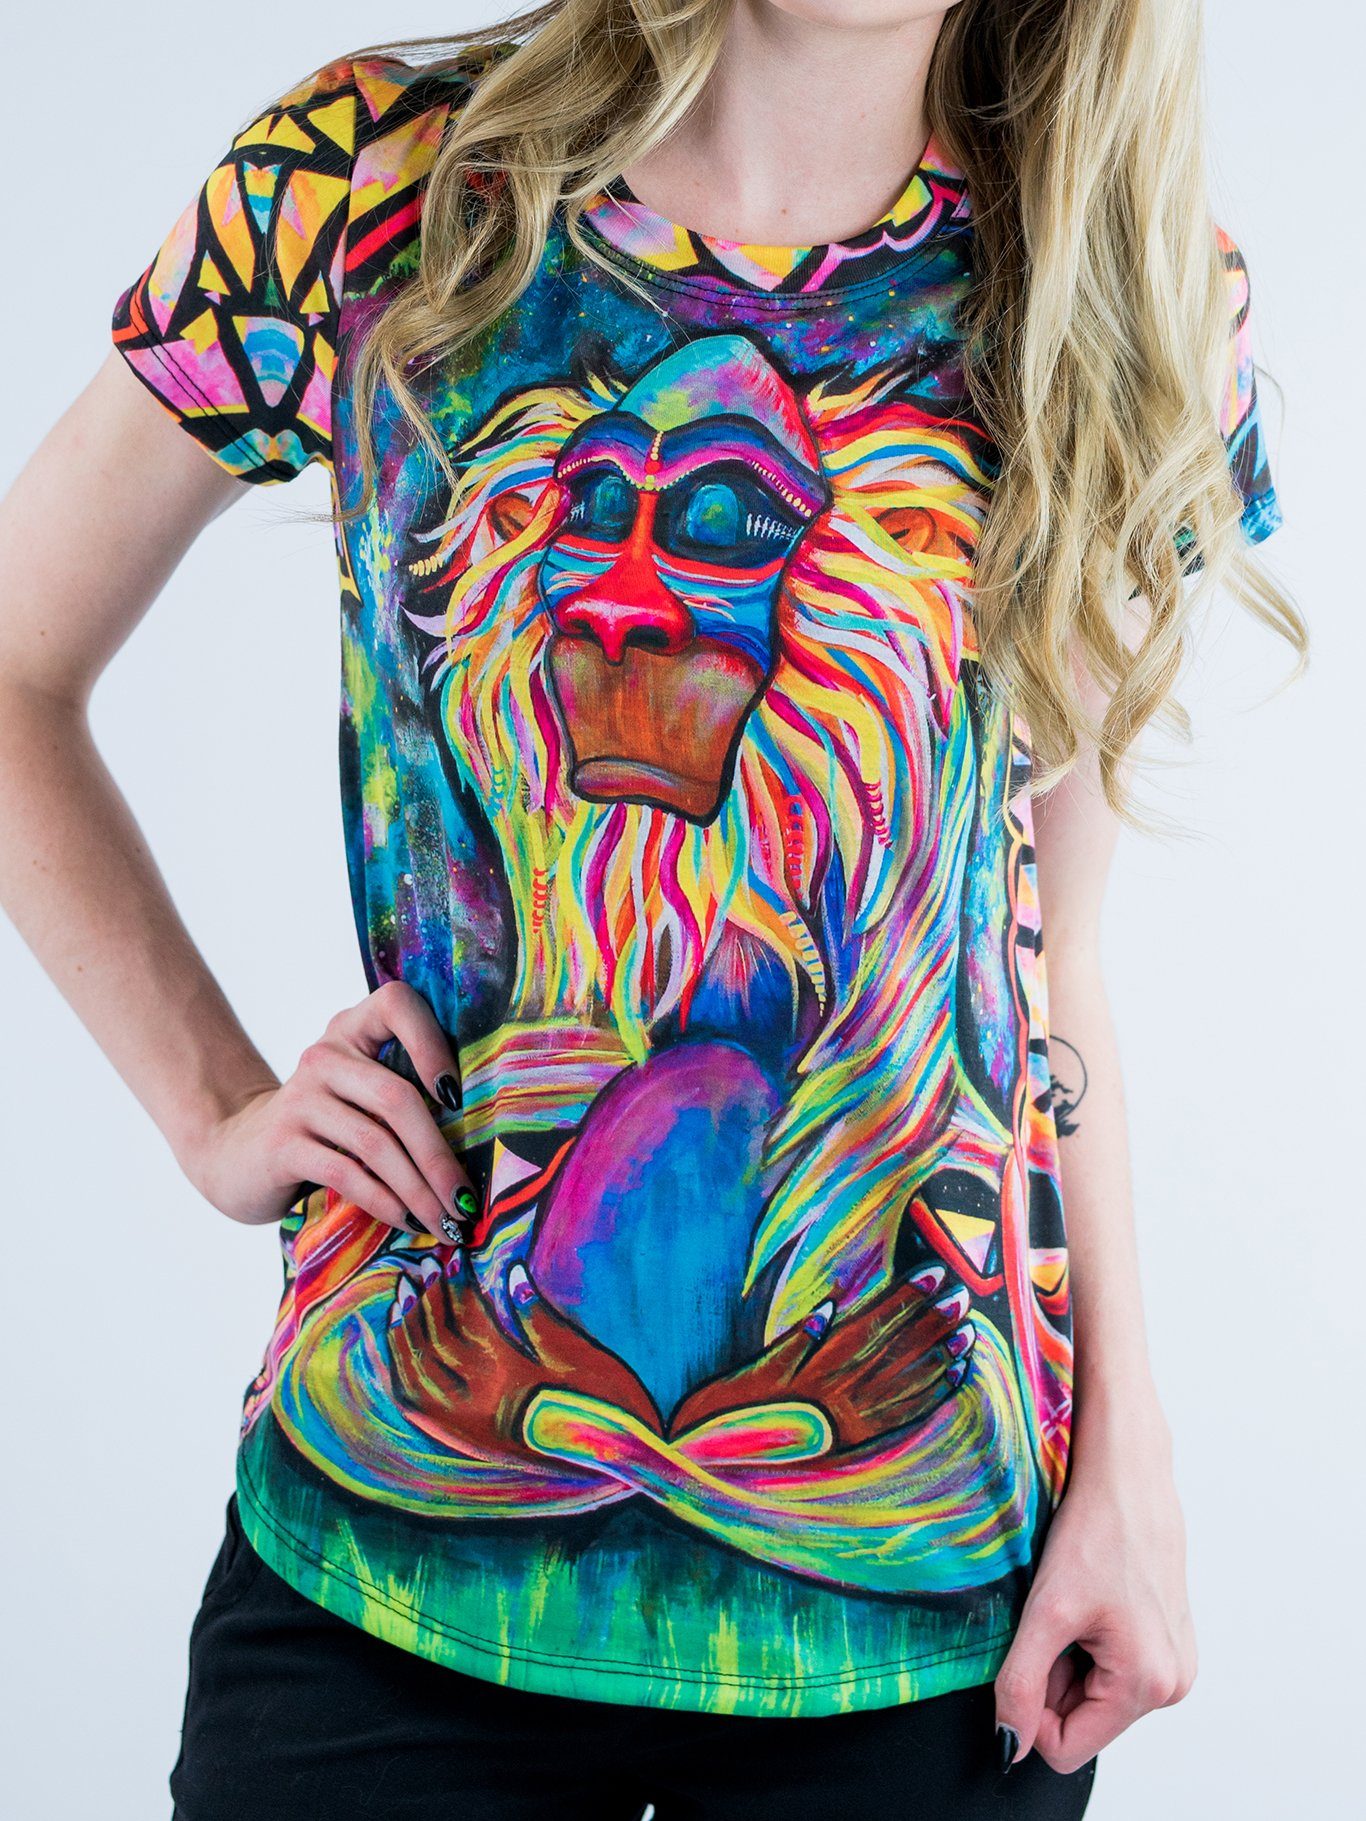 Women's Collection  Fun & Trippy Women's Clothing Designs